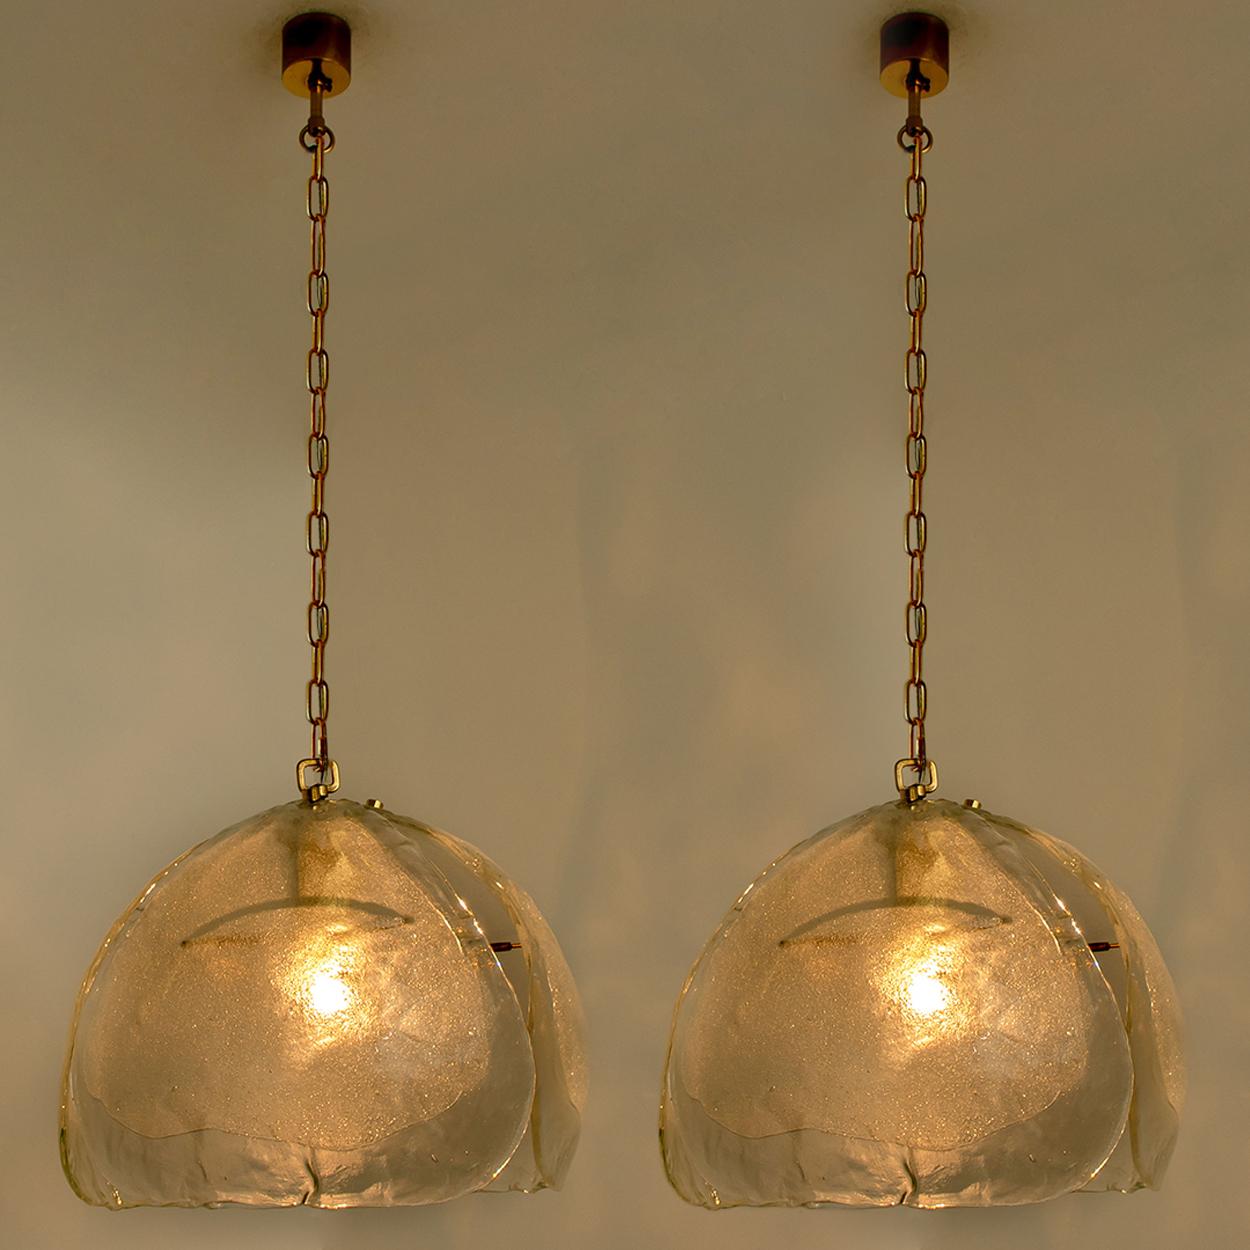 Mid-Century Modern 1 of the 2 Kalmar Style Pendant Lights, Clear Glass and Brass, 1970s For Sale